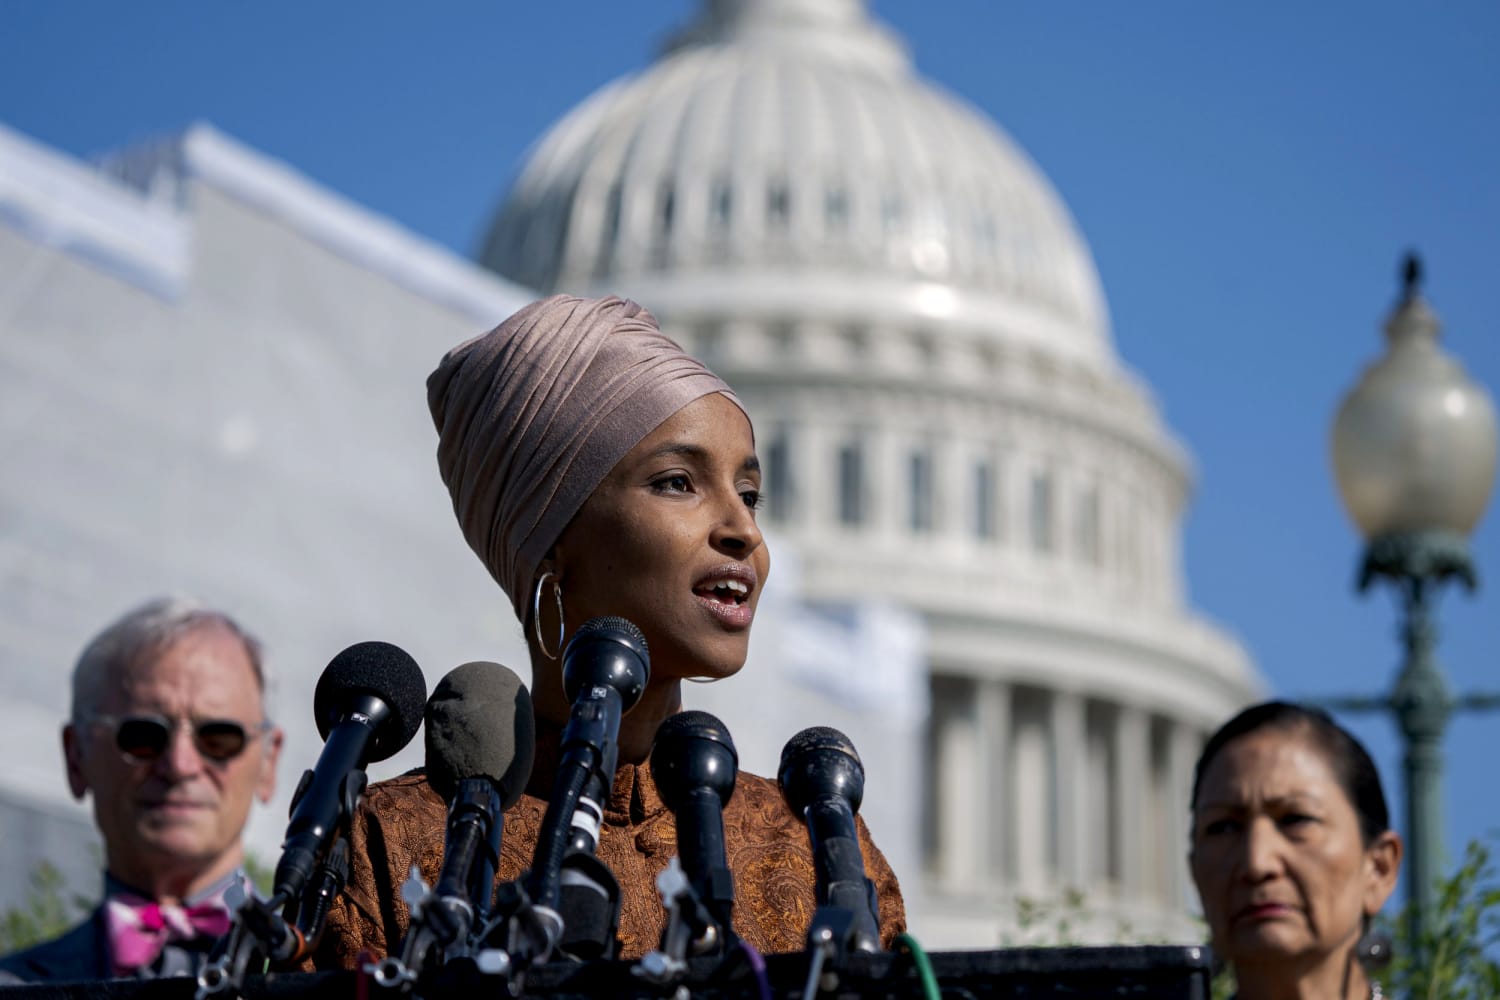 Got married!' Rep. Ilhan Omar says in announcing wedding to political consultant